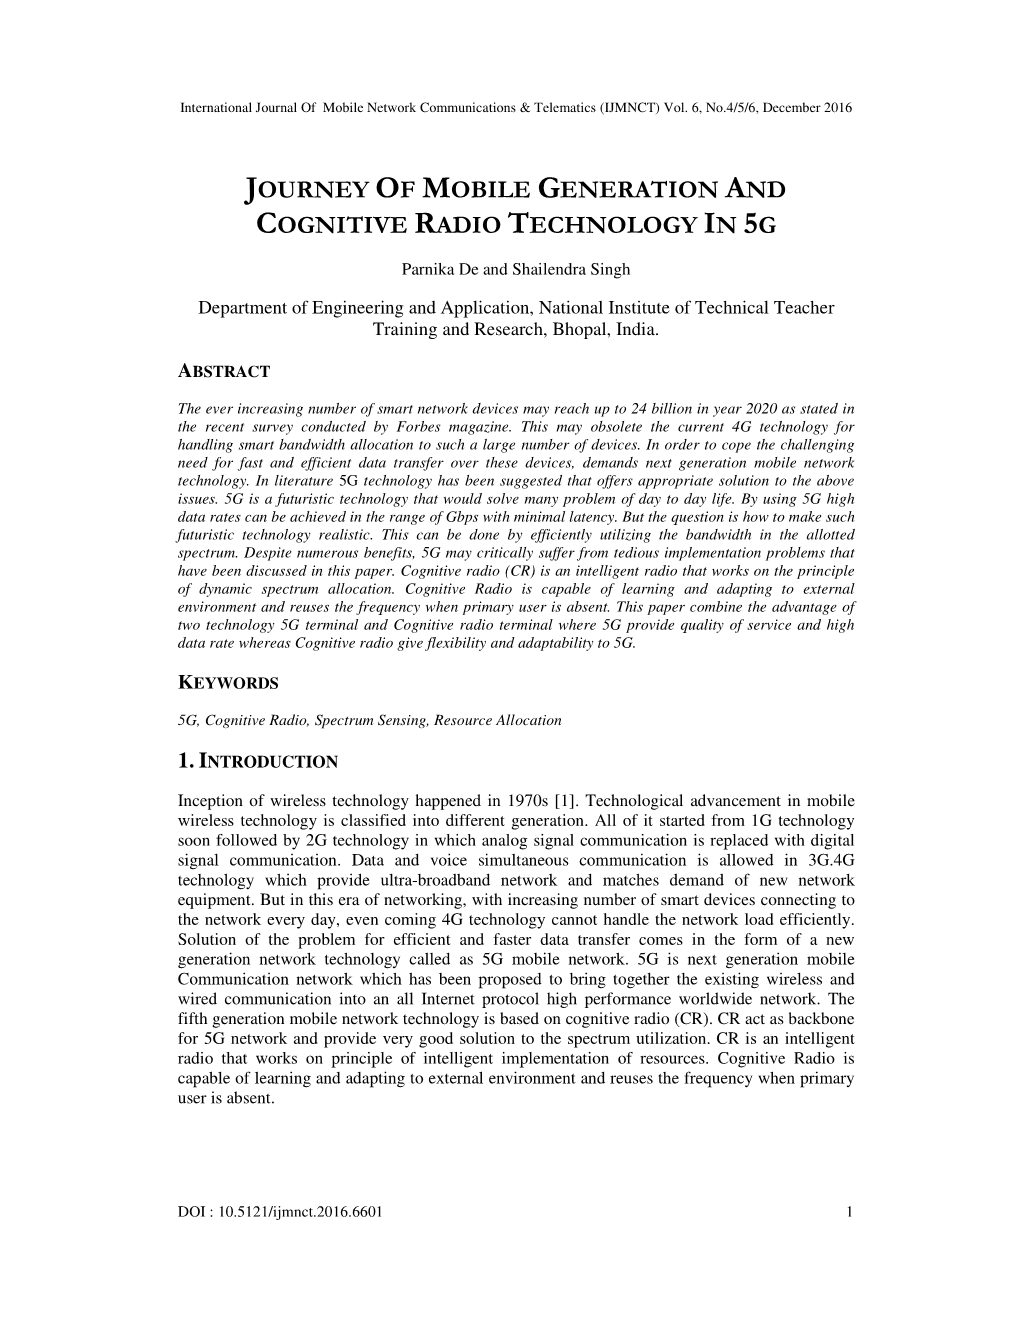 Journey of Mobile Generation and Cognitive Radio Technology in 5G